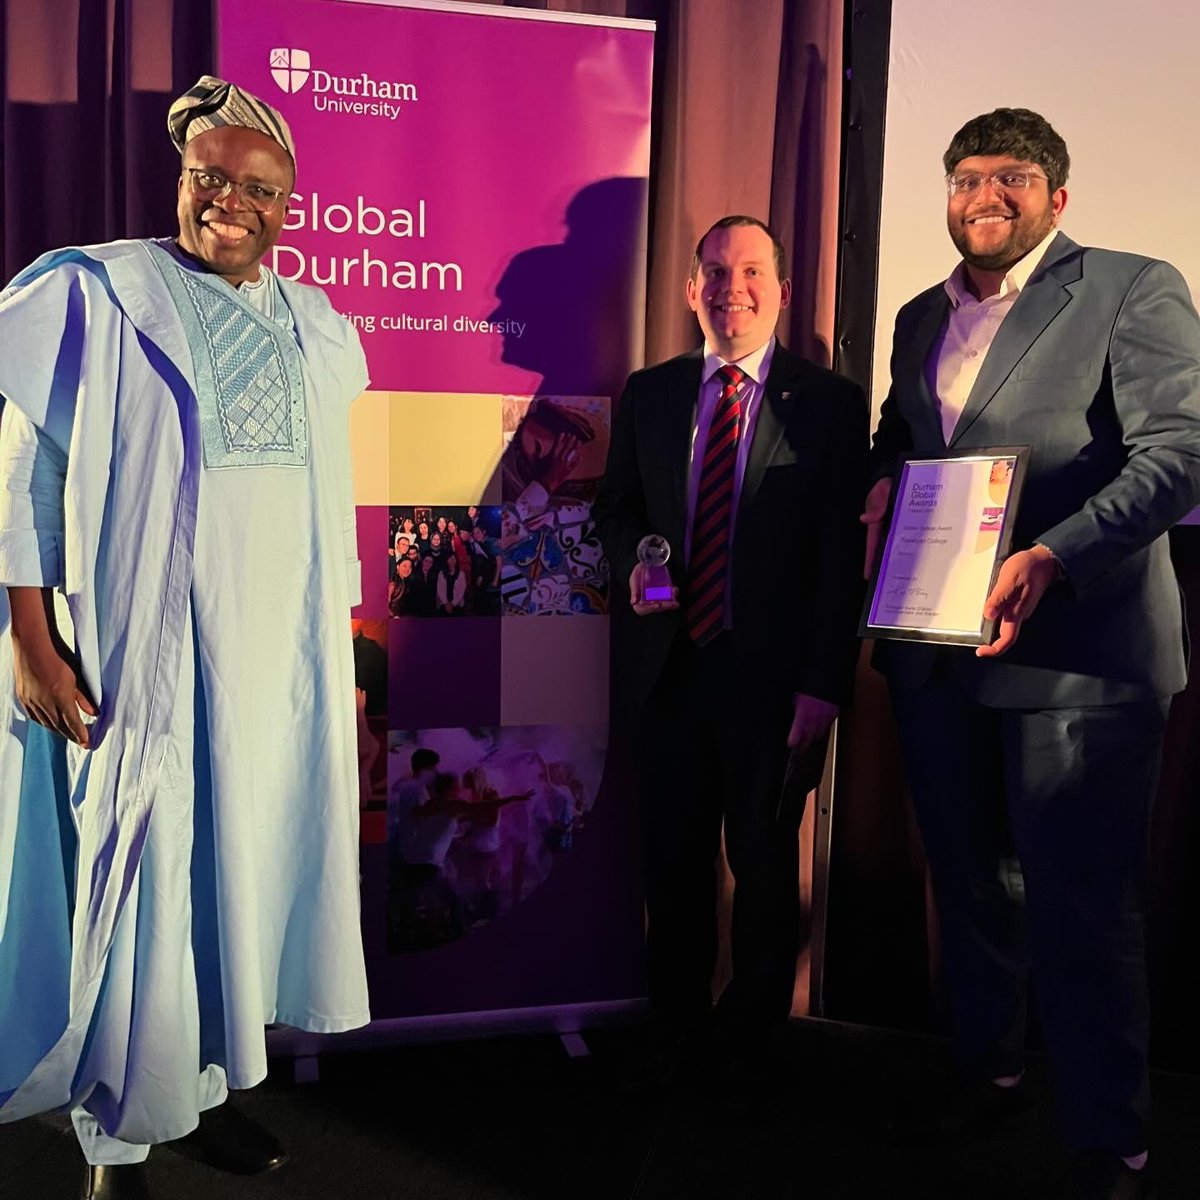 Trevelyan College won the Global College Award at yesterday’s @durham_uni Global Awards! Thank you to our students, staff, alumni, and SCR members for your many contributions to our global community #TrevelyanCollege #explore #global #community #DUGlobalWeek #celebrate